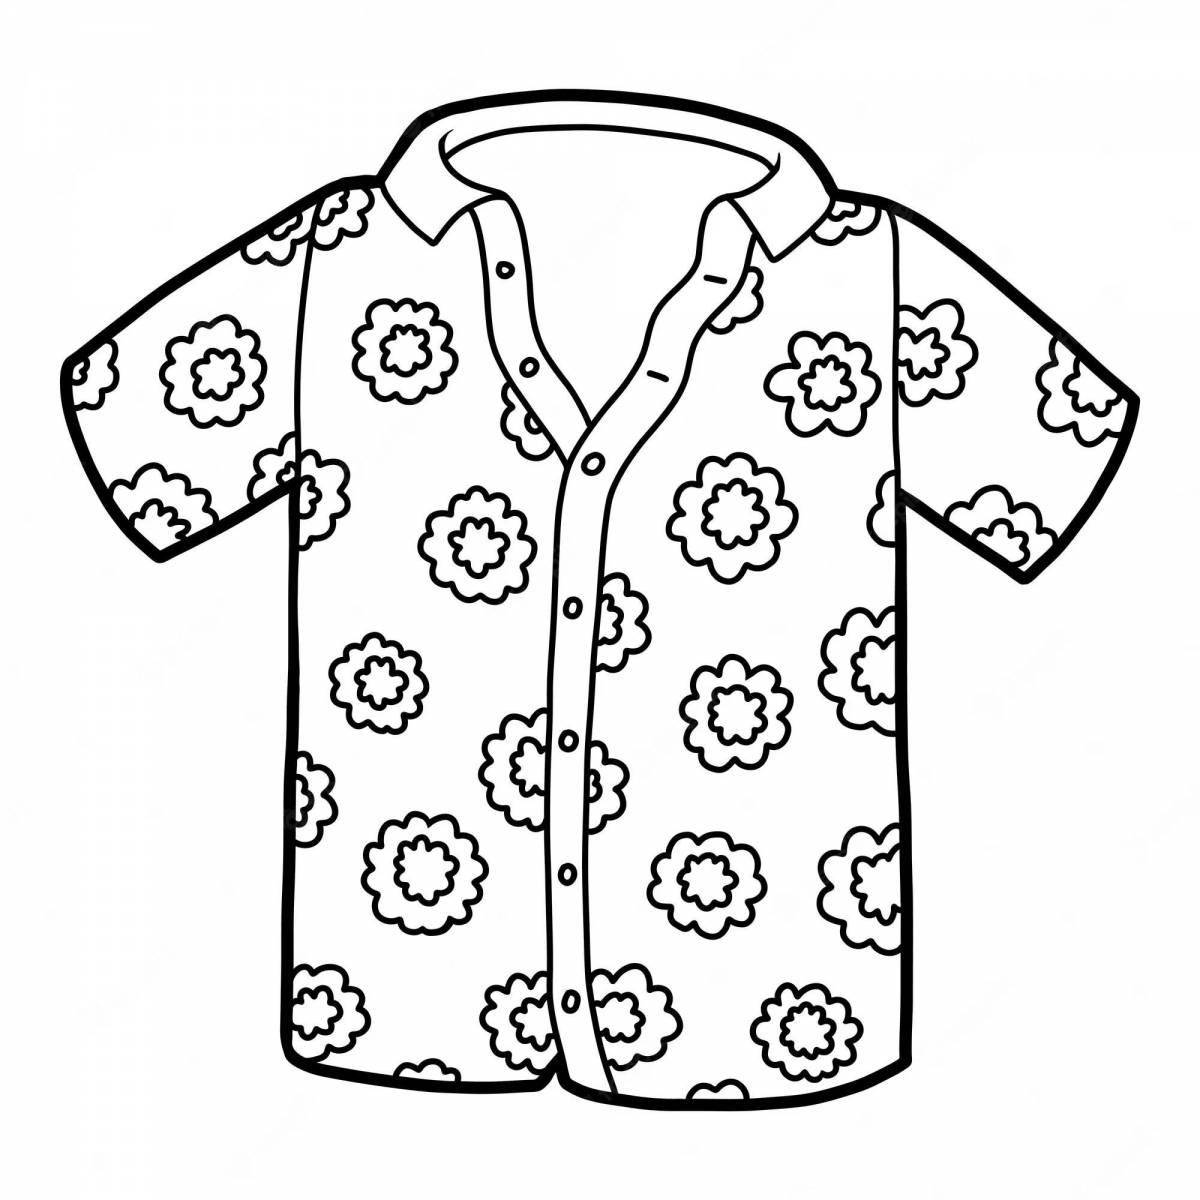 Adorable coloring shirt for 3-4 year olds